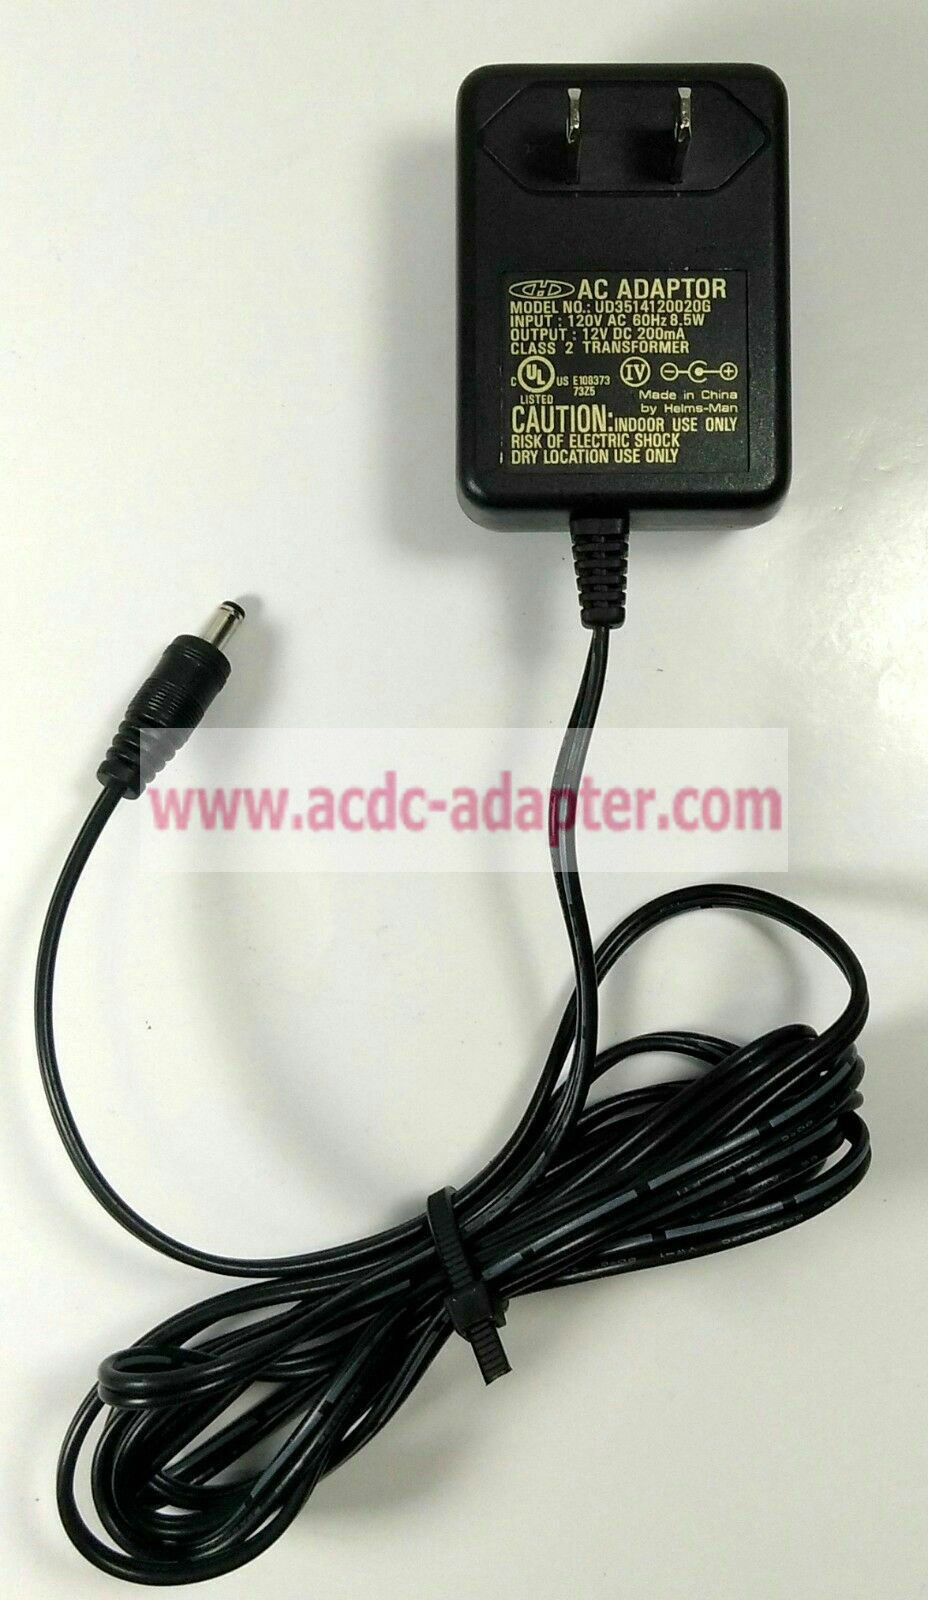 New "H" UD3514120020G 12V 200mA AC Adapter AC DC Power Supply Charger - Click Image to Close